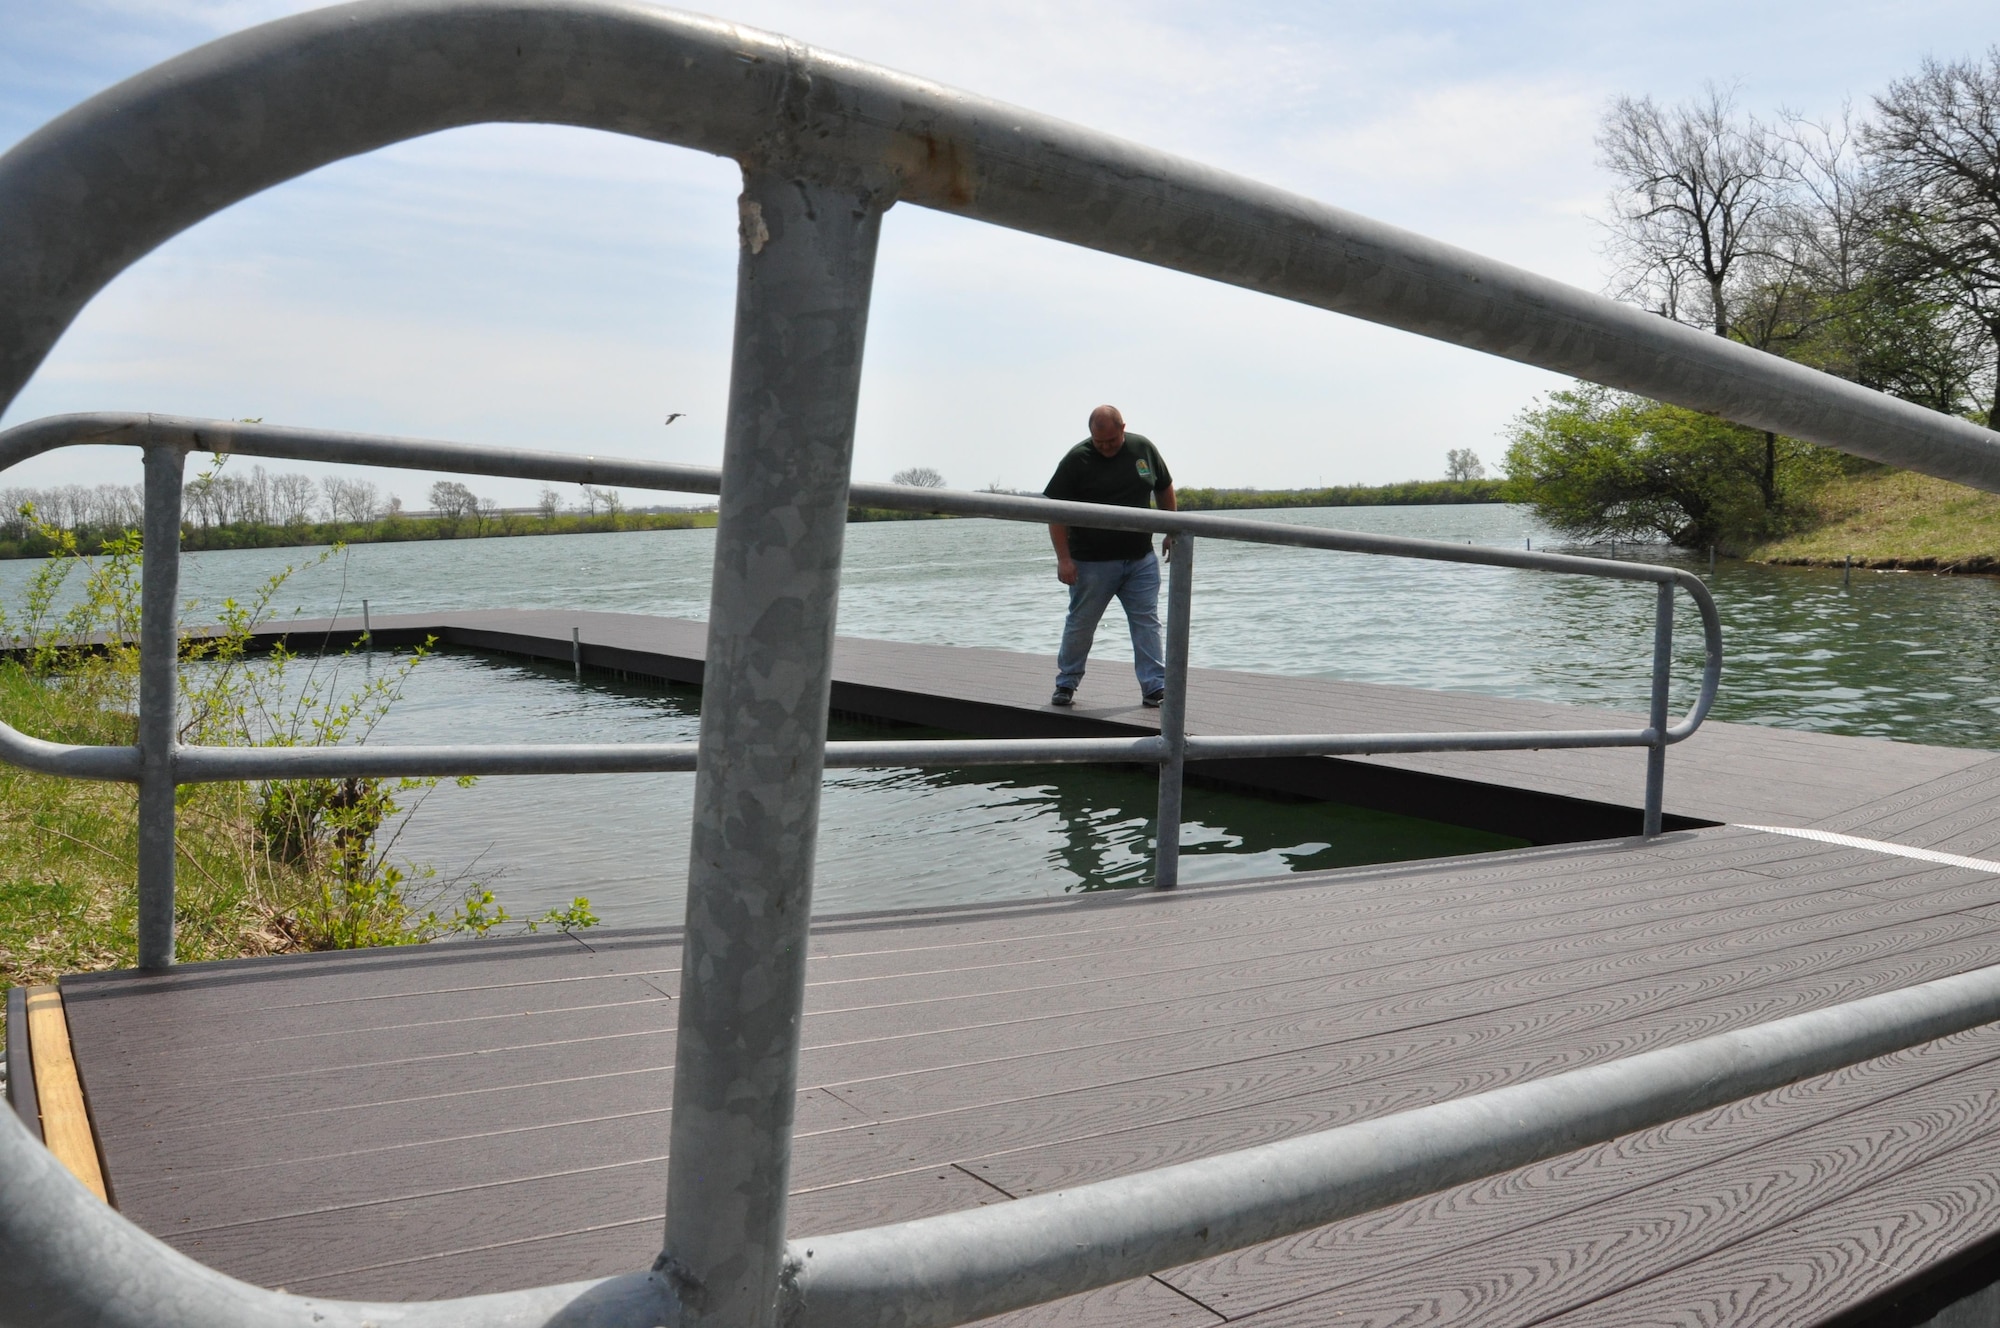 Brandon Dixon, Outdoor Recreation Manager, Community Services Flight, 88th Force Support Squadron, inspects the dock at the Bass Lake Recreational Facility at Wright-Patterson Air Force Base April 10, 2017. The dock required extensive repairs to meet safety requirements, including securing it to the bank, replacing planking and adding flotation devices. The dock, which was closed in November 2016 to begin the repairs, is scheduled to reopen mid-to-late summer after the last of the flotation equipment is installed and tested. (U.S. Air Force photo/Jim Mitchell)